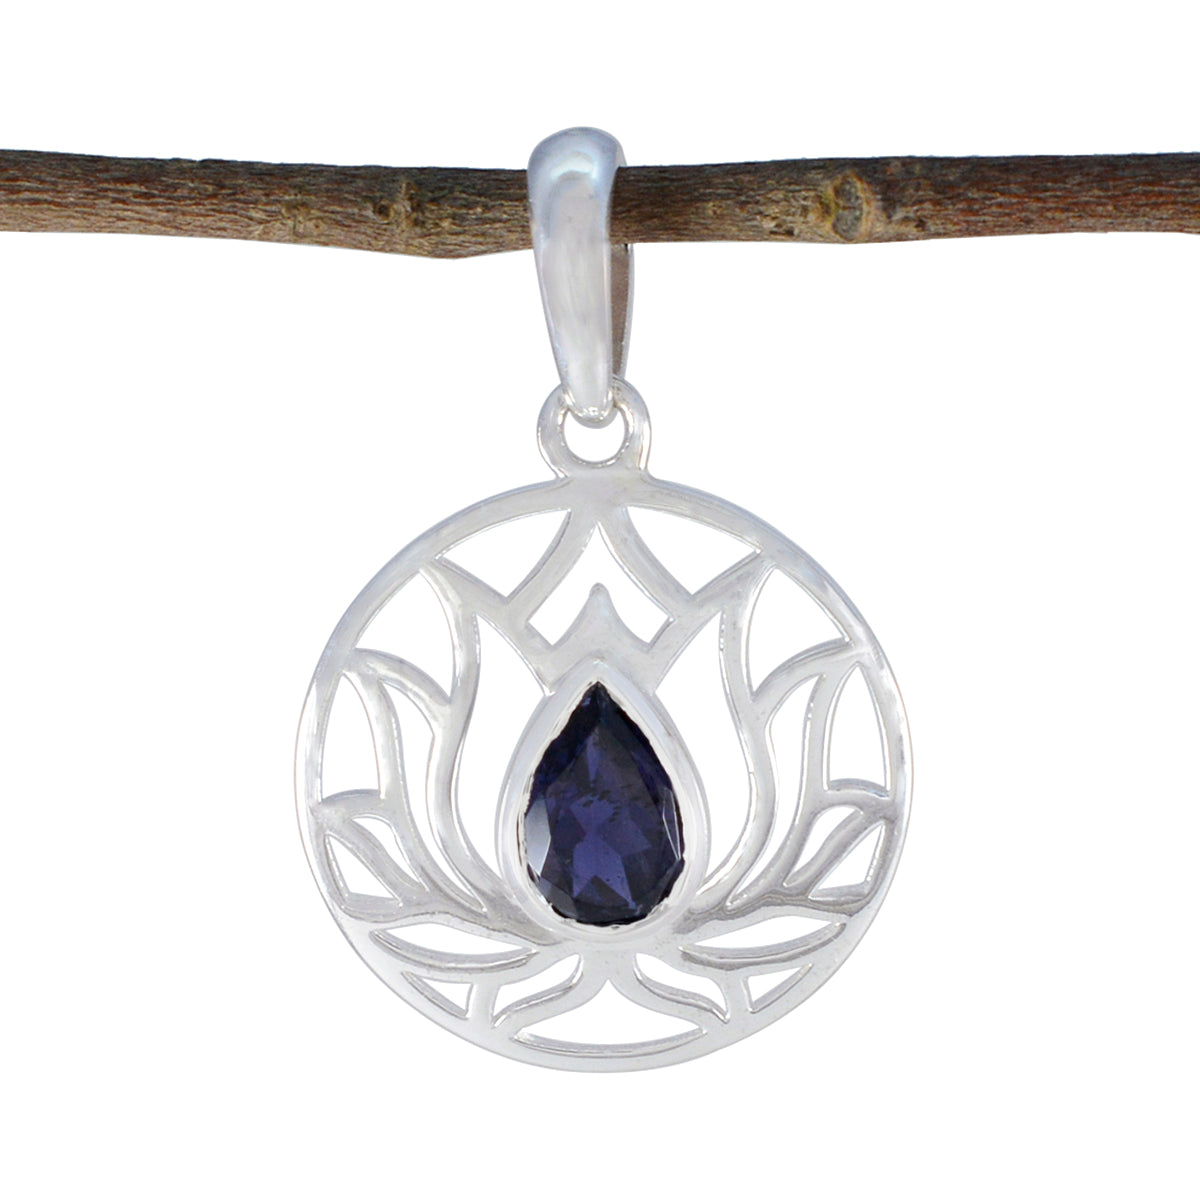 Riyo Bewitching Gems Pear Faceted Blue Iolite Silver Pendant Gift For Boxing Day